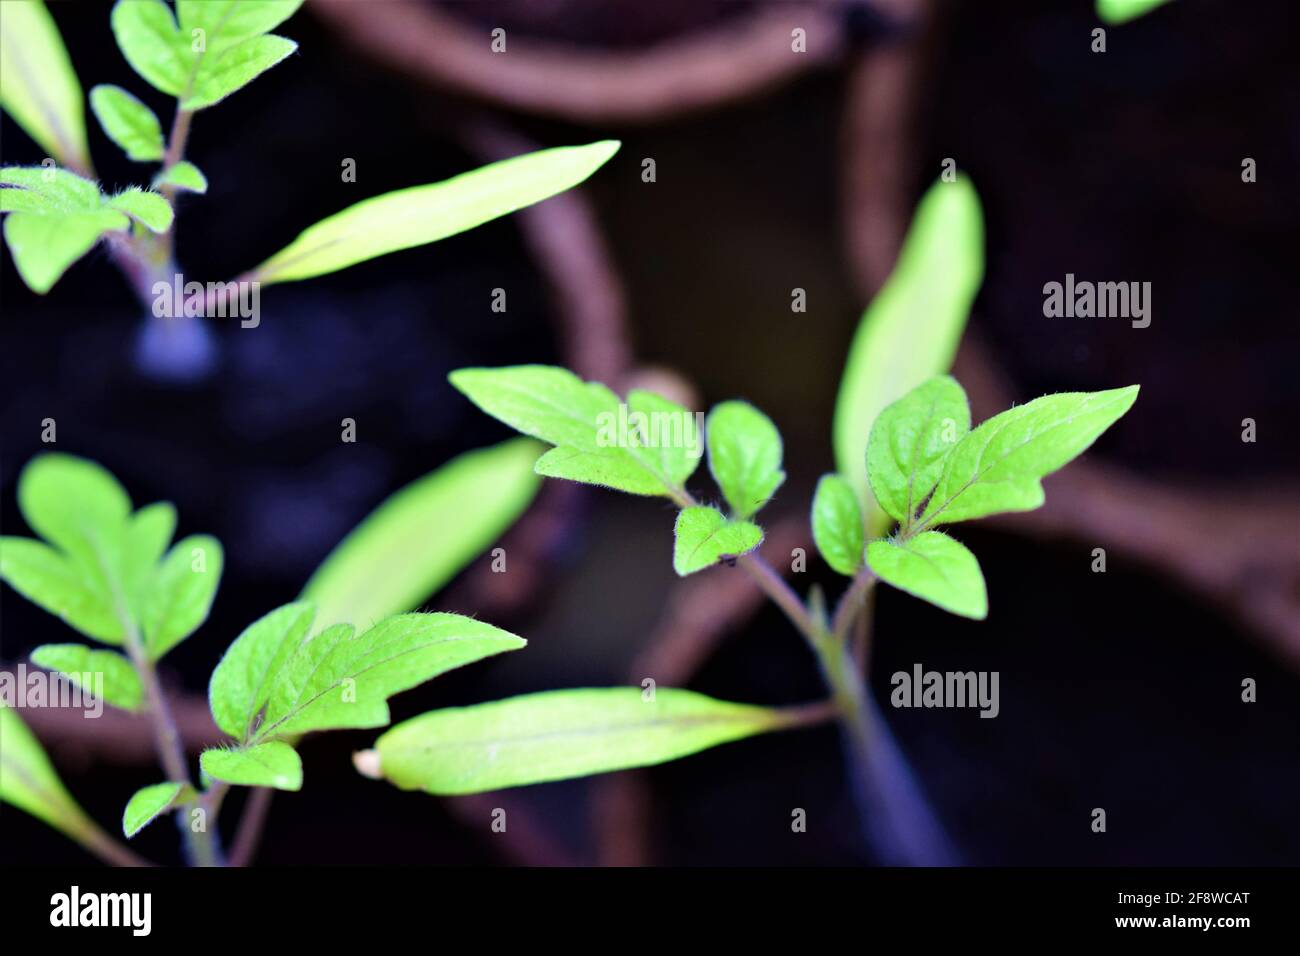 Young tomato plants from above and close up Stock Photo